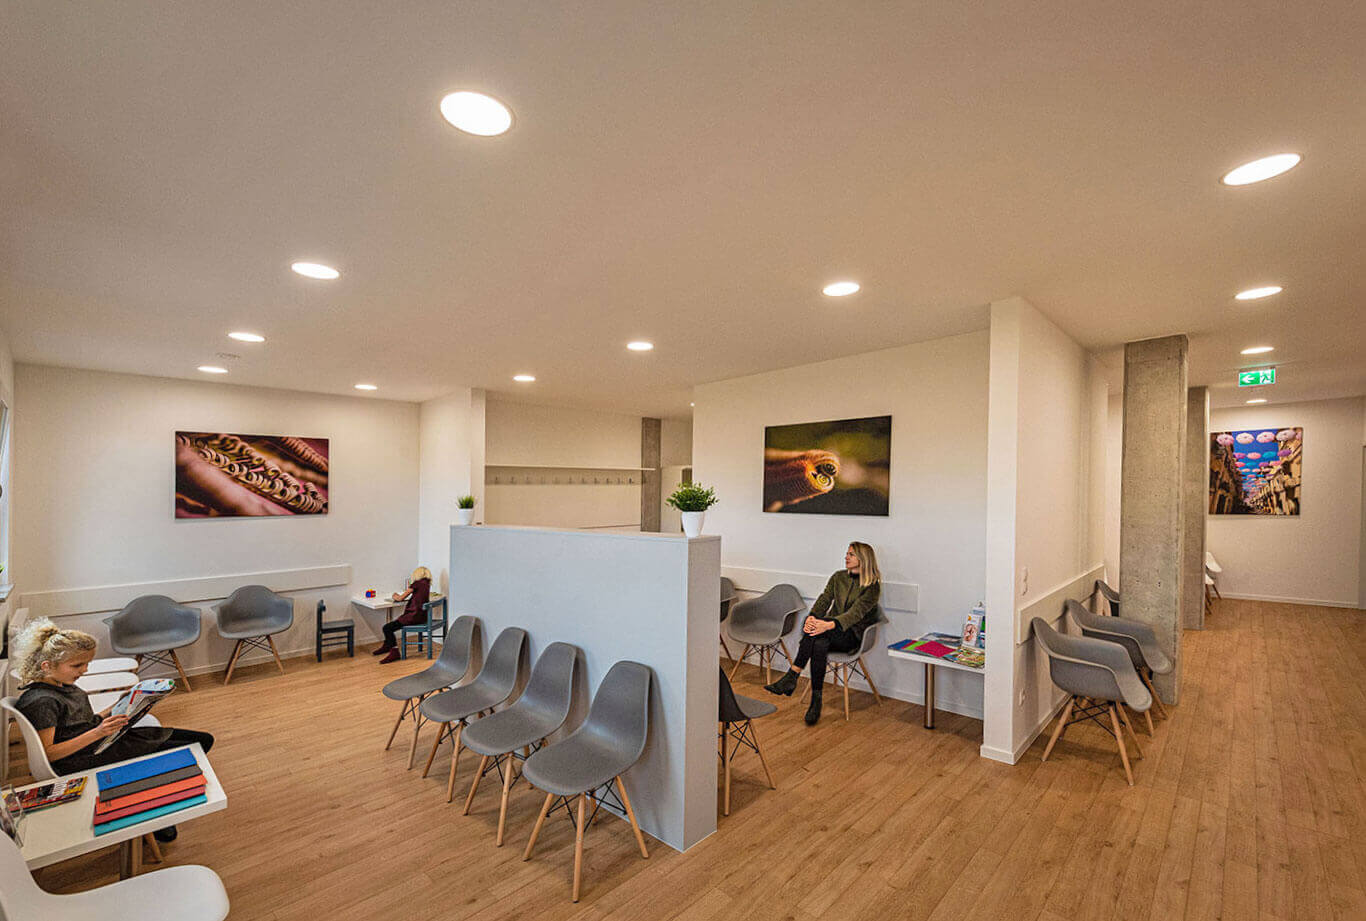 Three patients are waiting in the friendly, bright waiting area